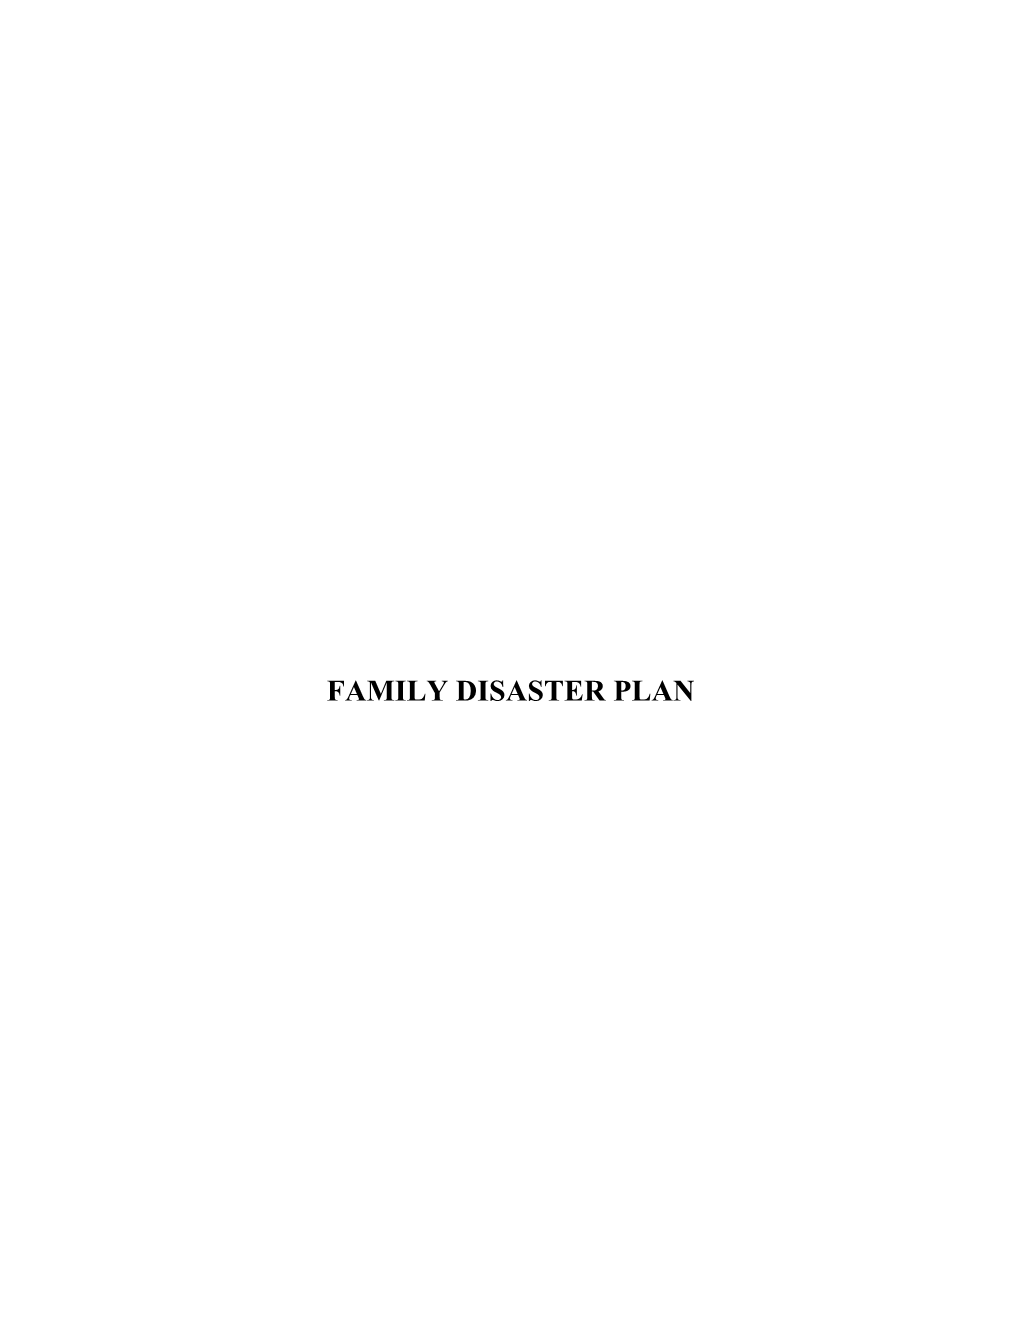 FAMILY DISASTER PLAN Template